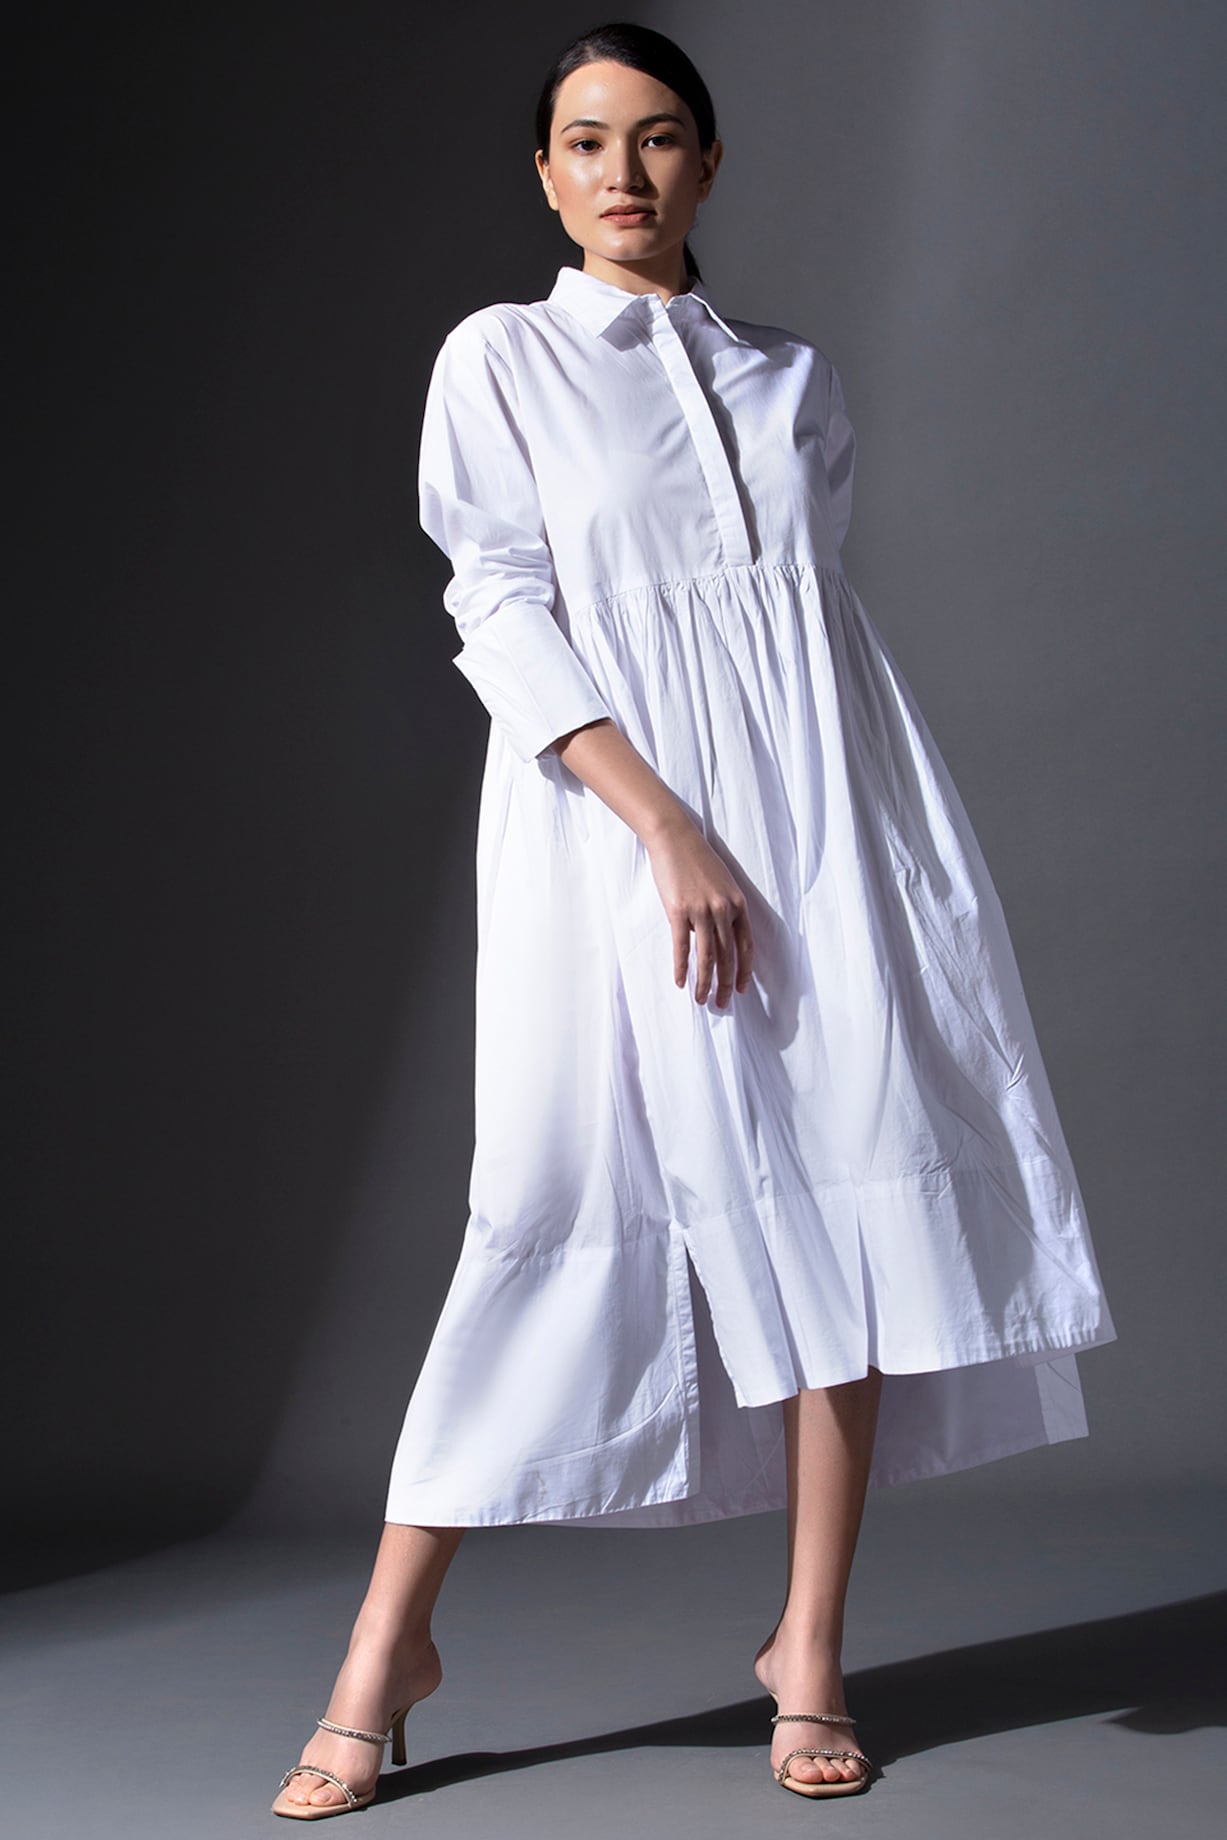 https://img.perniaspopupshop.com/catalog/product/m/a/MANAA0923112_4.jpg?impolicy=zoomimage